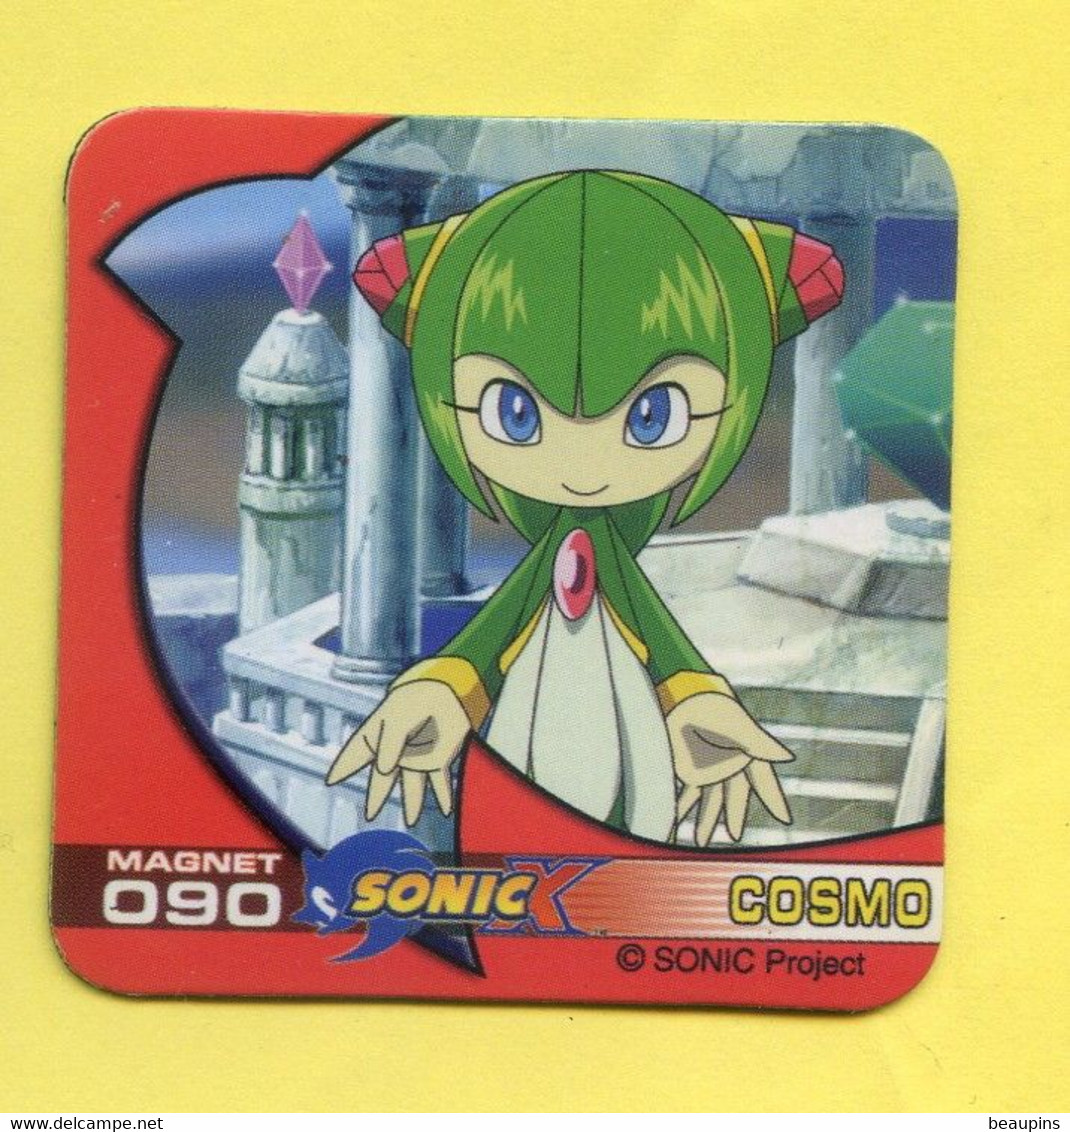 MAGNET AIMANT SONIC ( Sega )  COSMO  N90 - Personnages